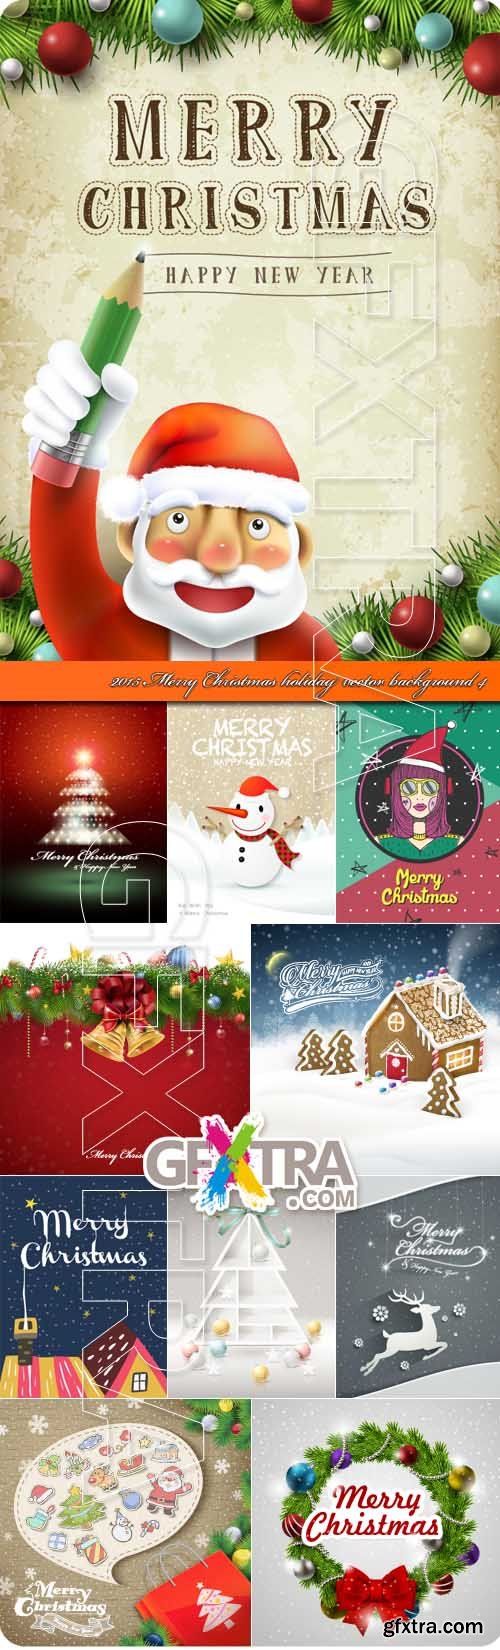 2015 Merry Christmas holiday vector background 4